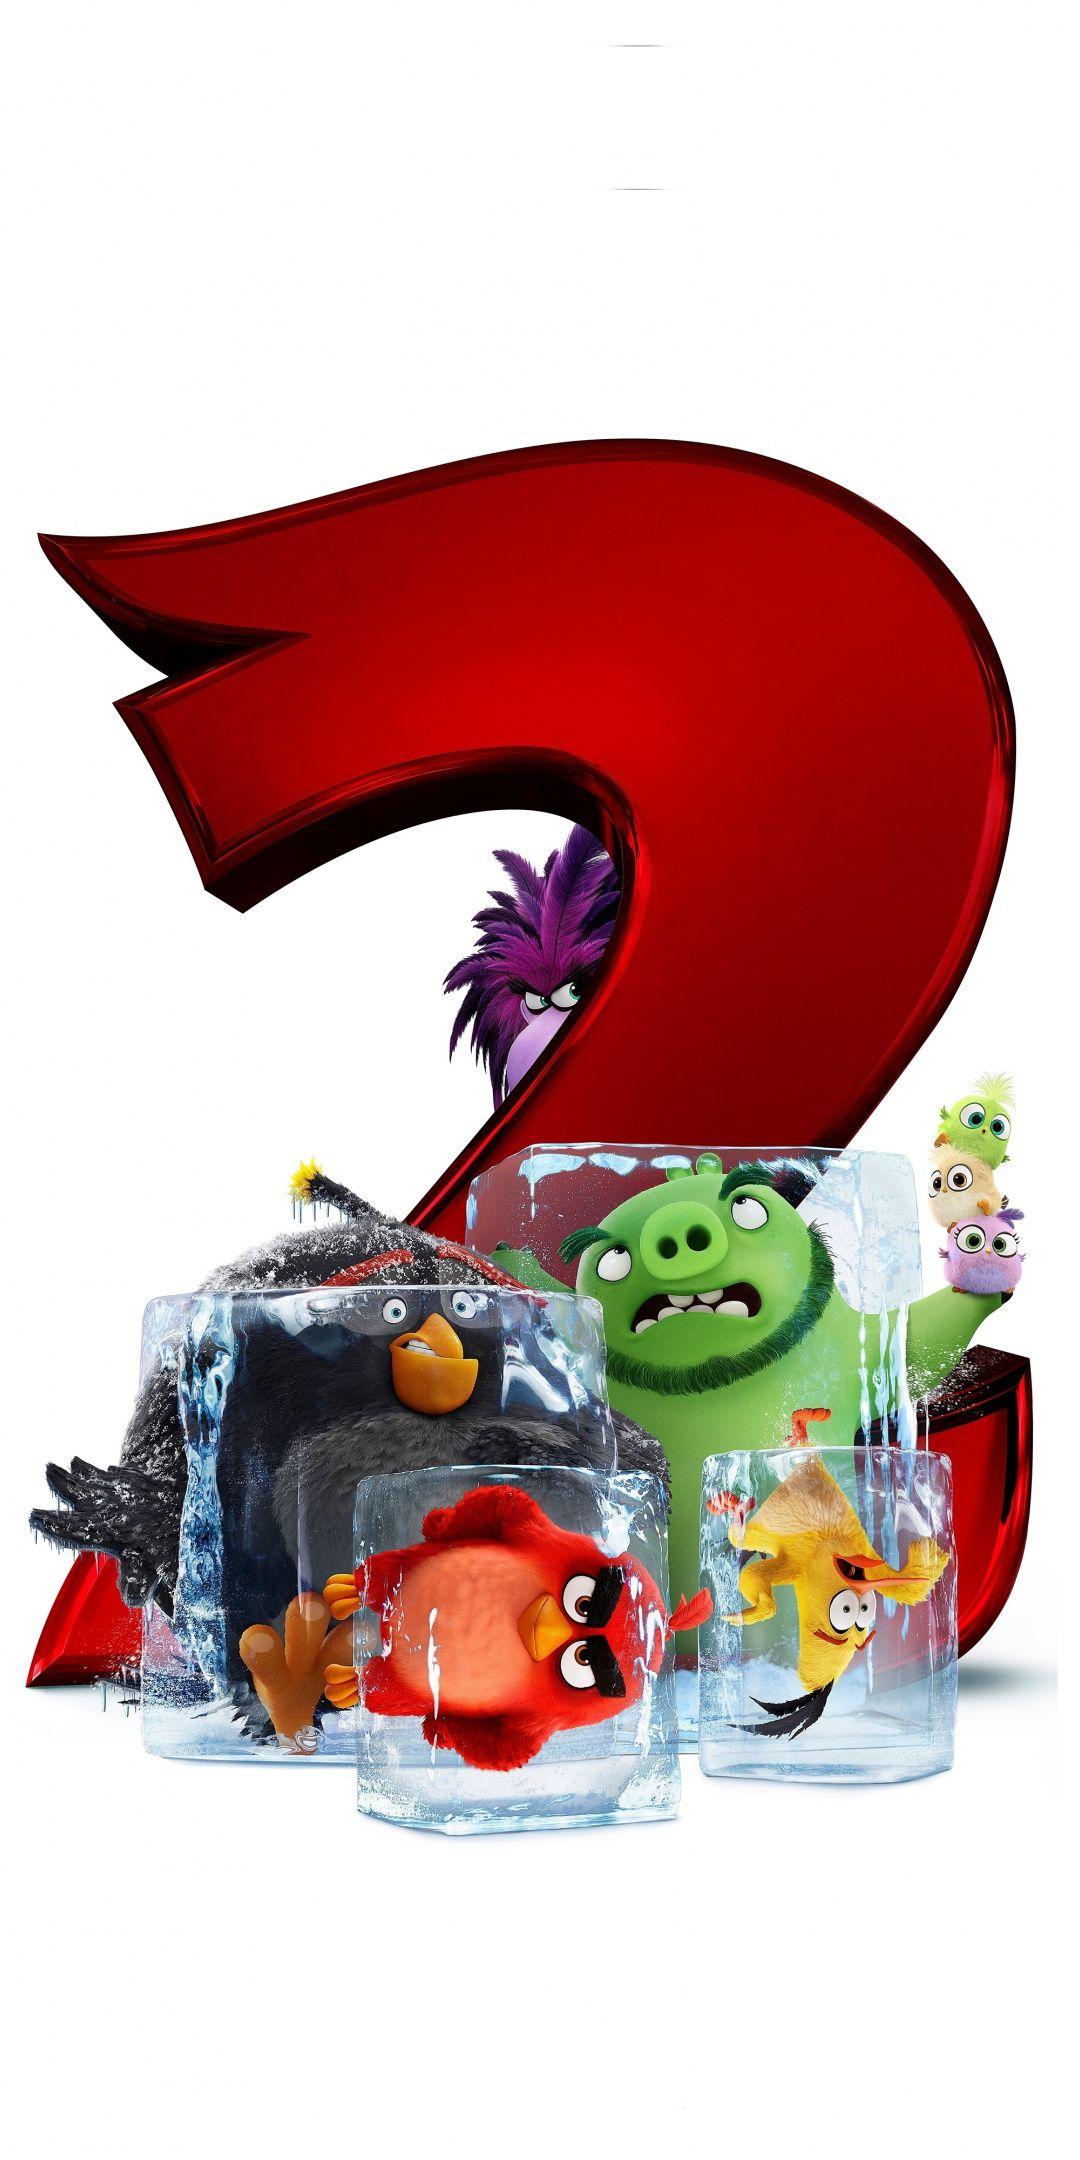 The Angry Birds Movie 1080x2160 wallpaper in 2019